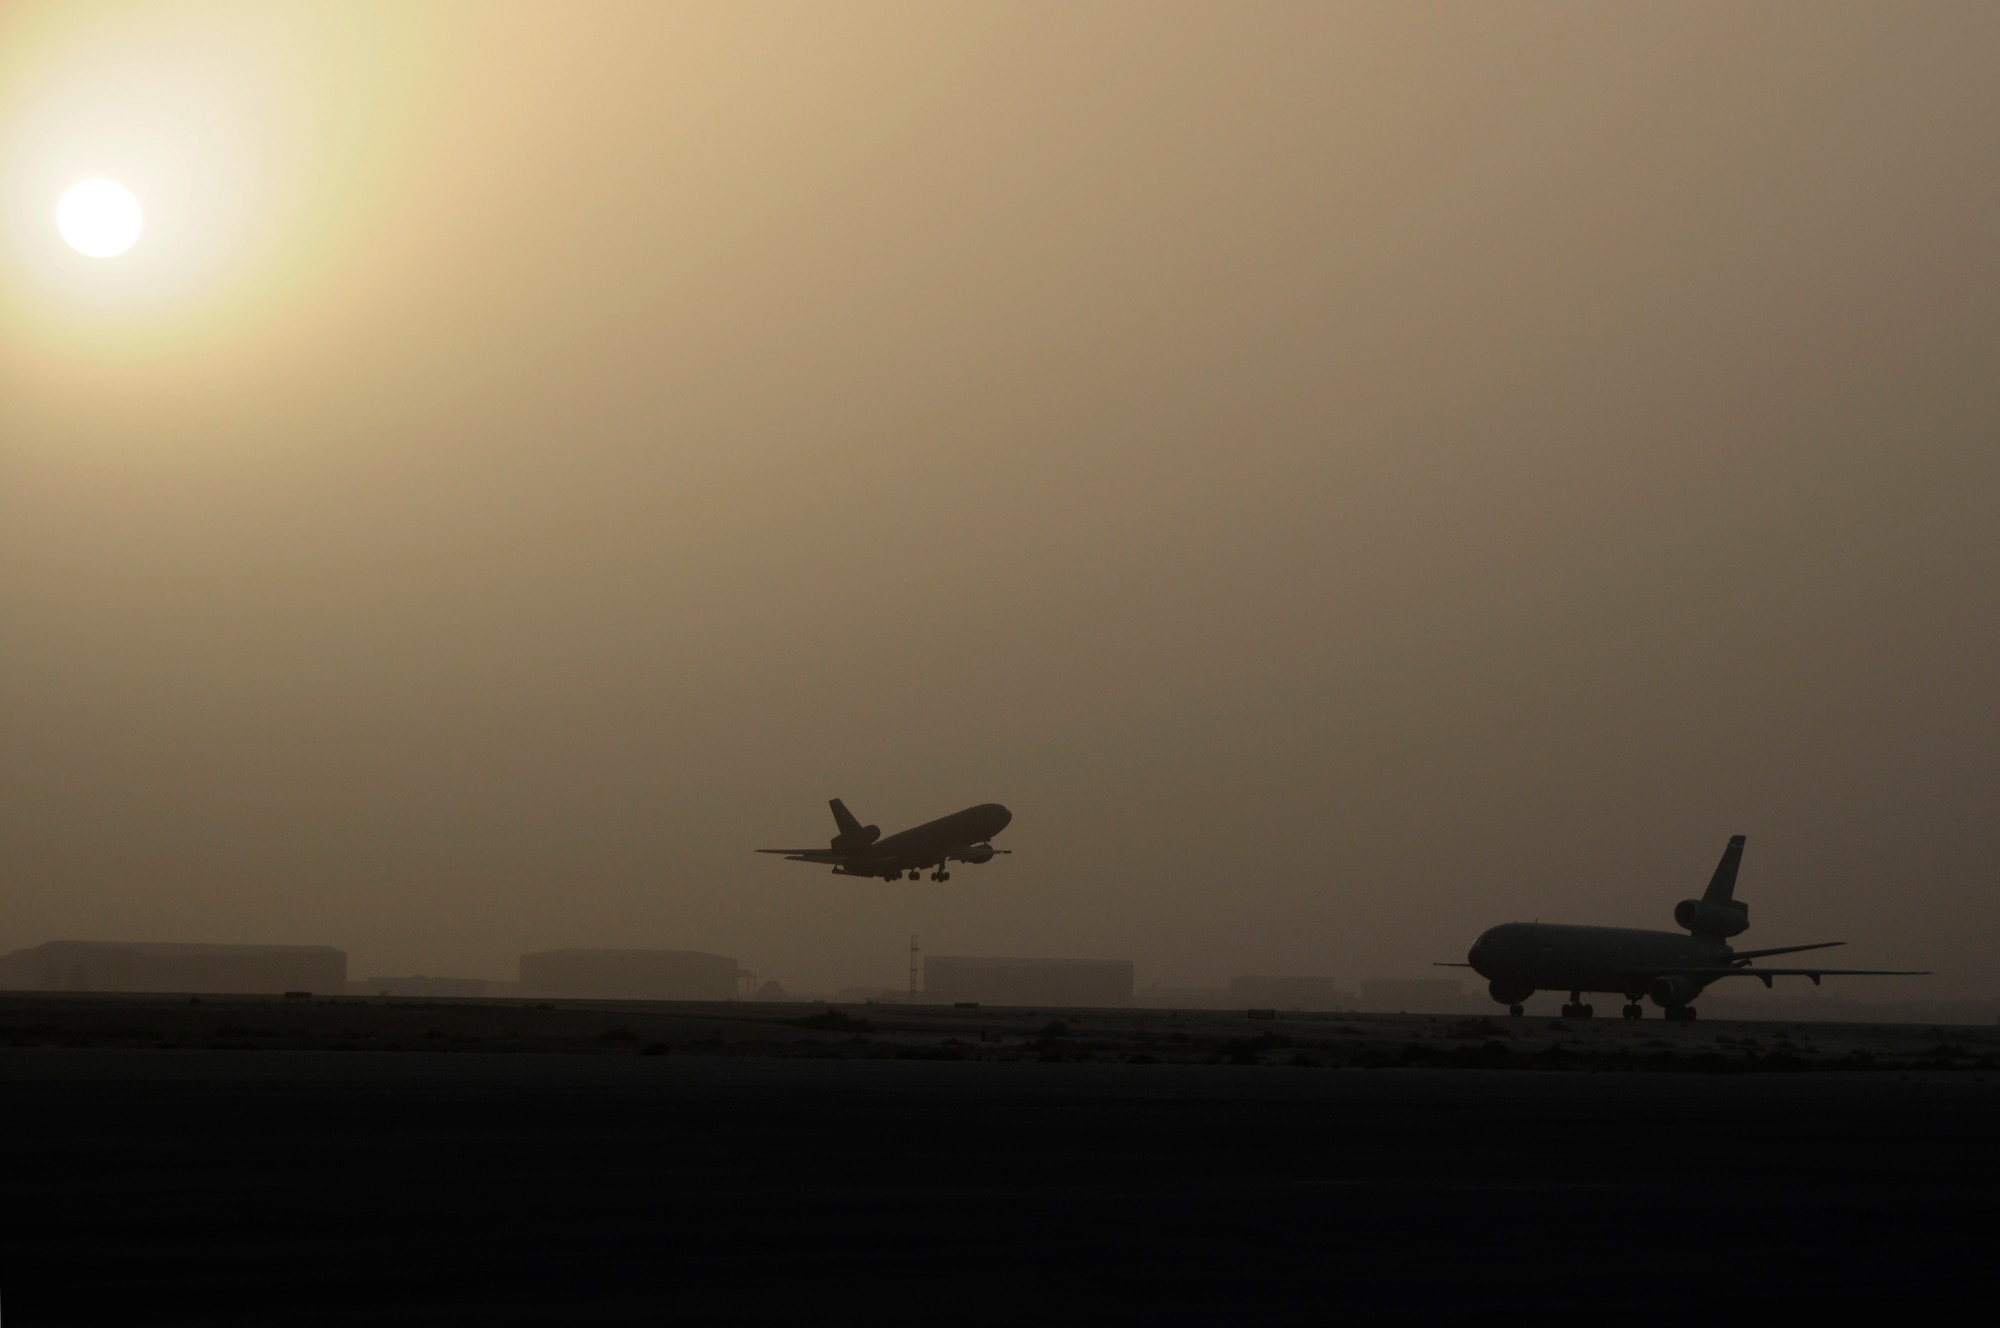 SOUTHWEST ASIA - A KC-10 Extender taxis in as another takes off from the flightline of the 380th Air Expeditionary Wing, Mar 23. The 380th AEW flies refueling and reconnaissance missions 24/7 in support of Operations Iraqi and Enduring Freedom and Joint Task Force Horn of Africa.  (U.S. Air Force photo by Senior Airman Brian J. Ellis) (Released)